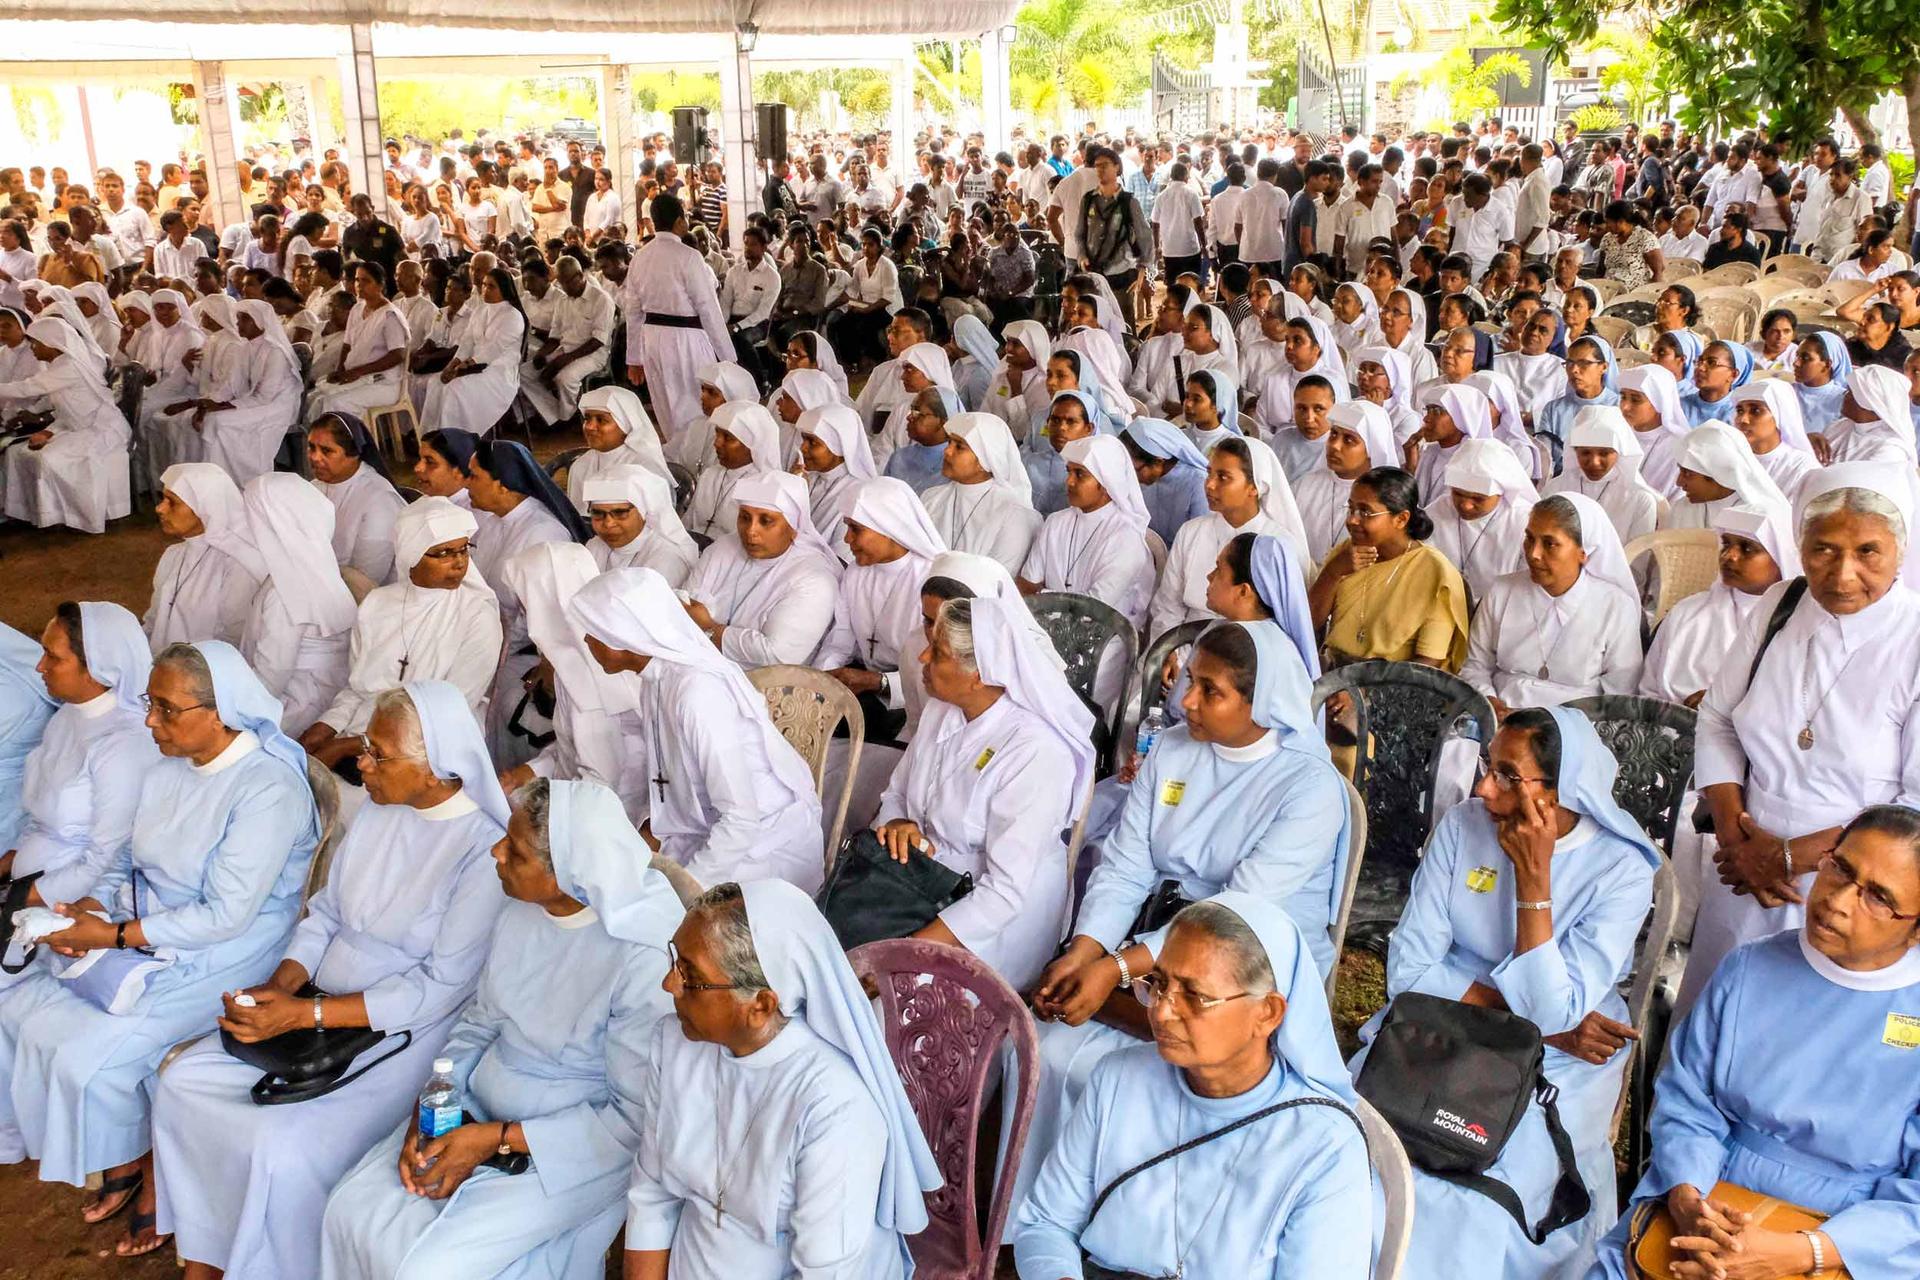 Nuns and other worshippers sit under a large tent